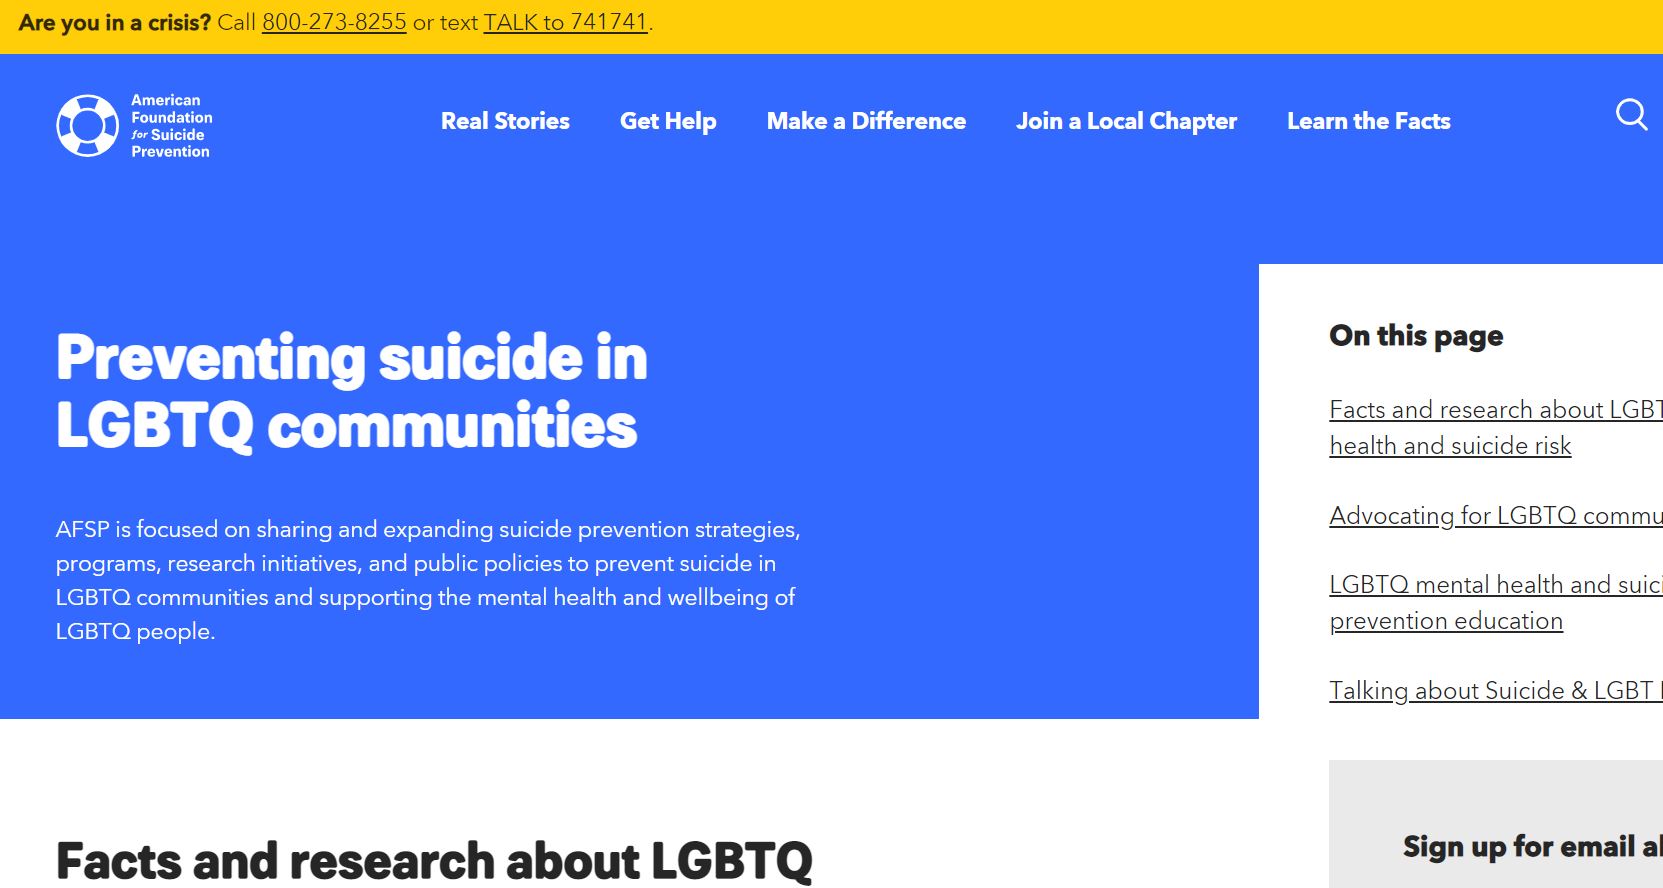 American Foundation for Suicide Prevention (AFSP): Preventing suicide in LGBTQ communities